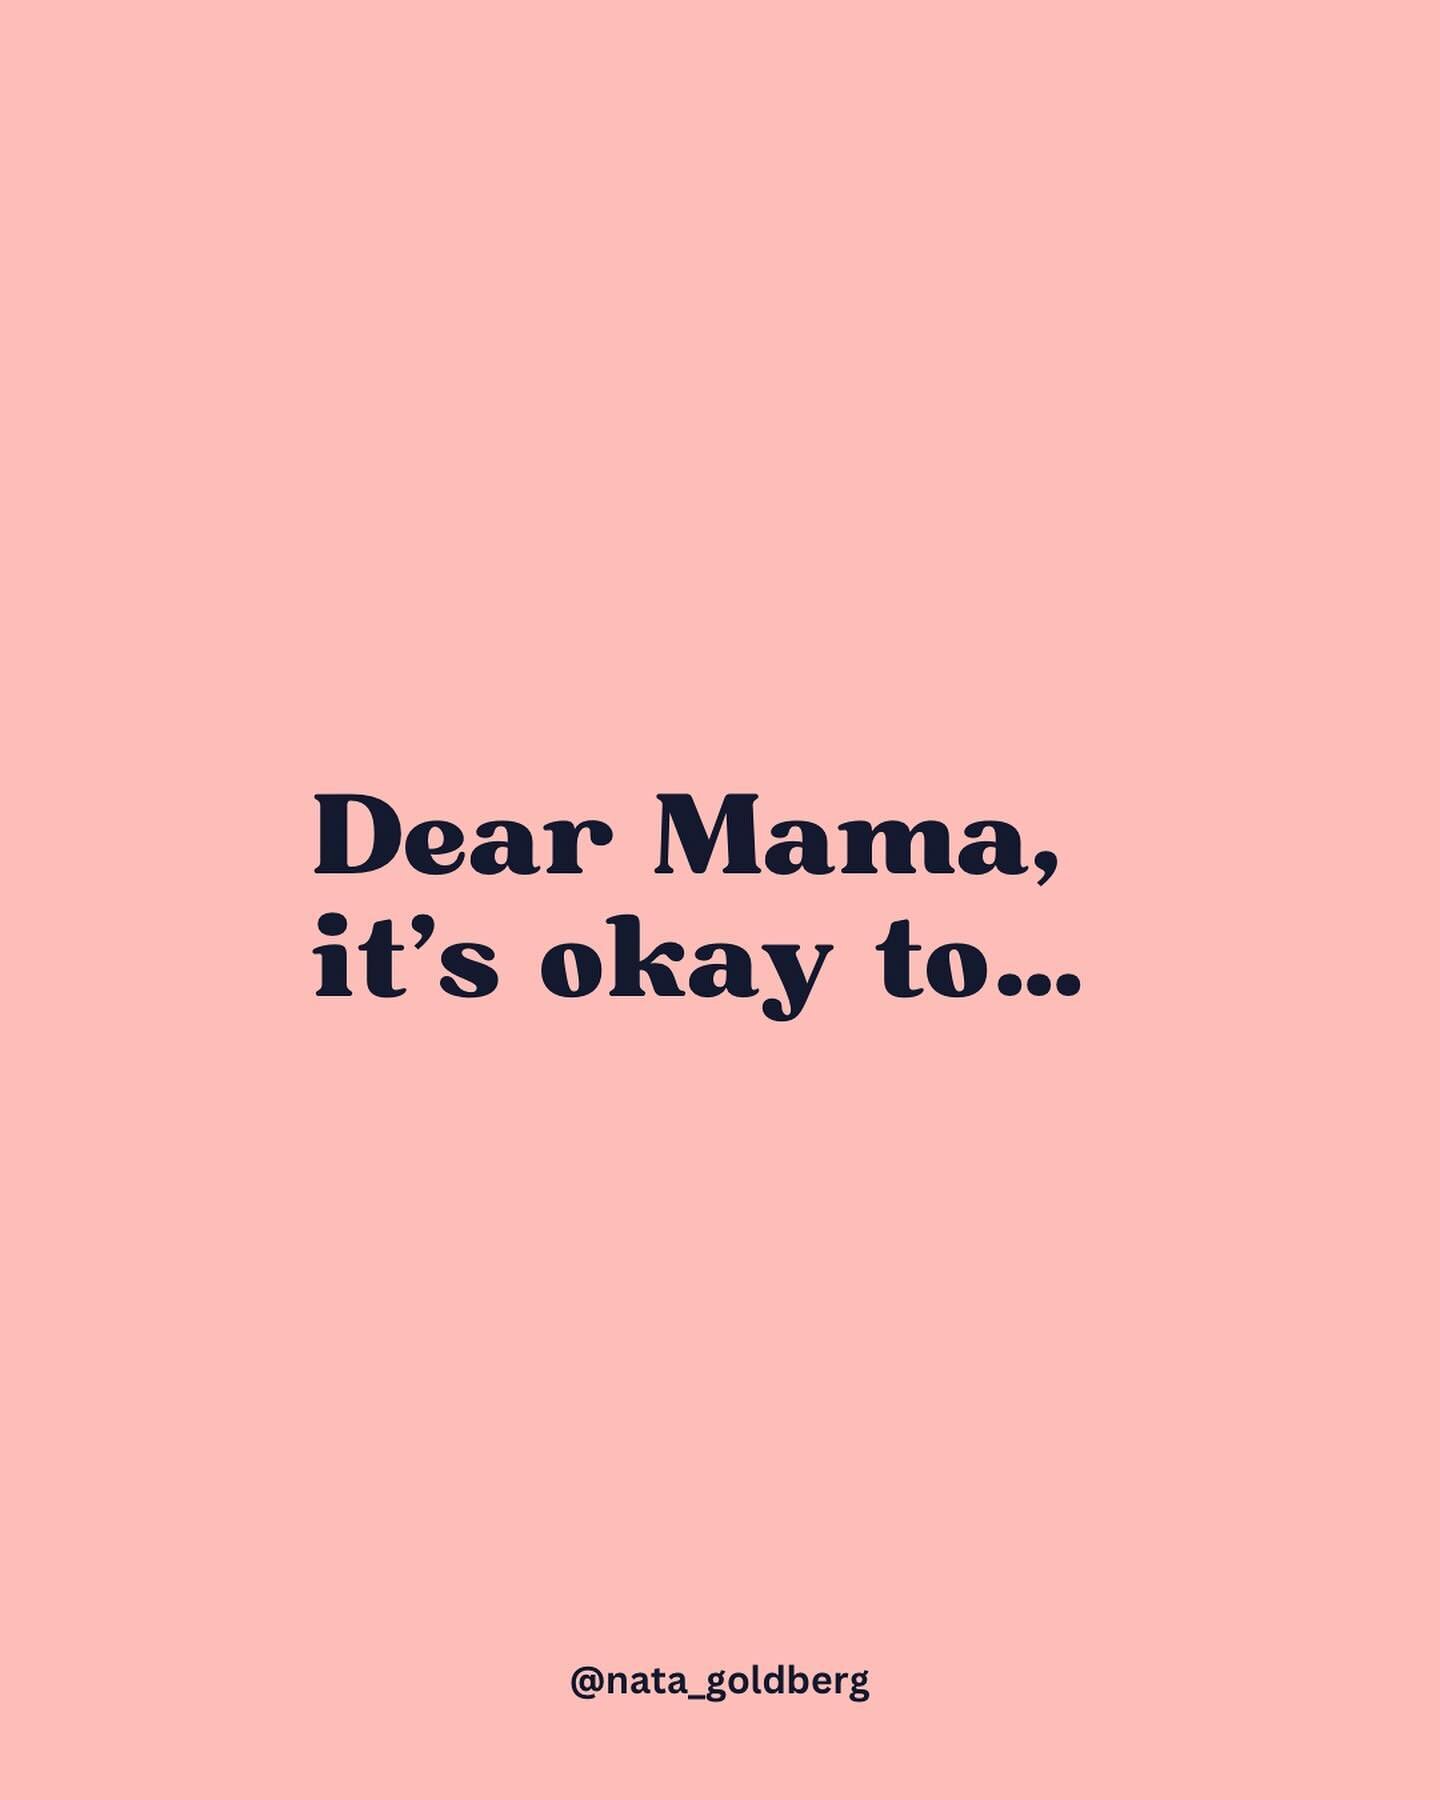 How much easier would motherhood be if we would all hear this during our pregnancy? ❤️⬇️

I saw so many posts from women who regretted not holding their babies enough, who decided to sleep train early on, who didn&rsquo;t set boundaries&hellip;

I to